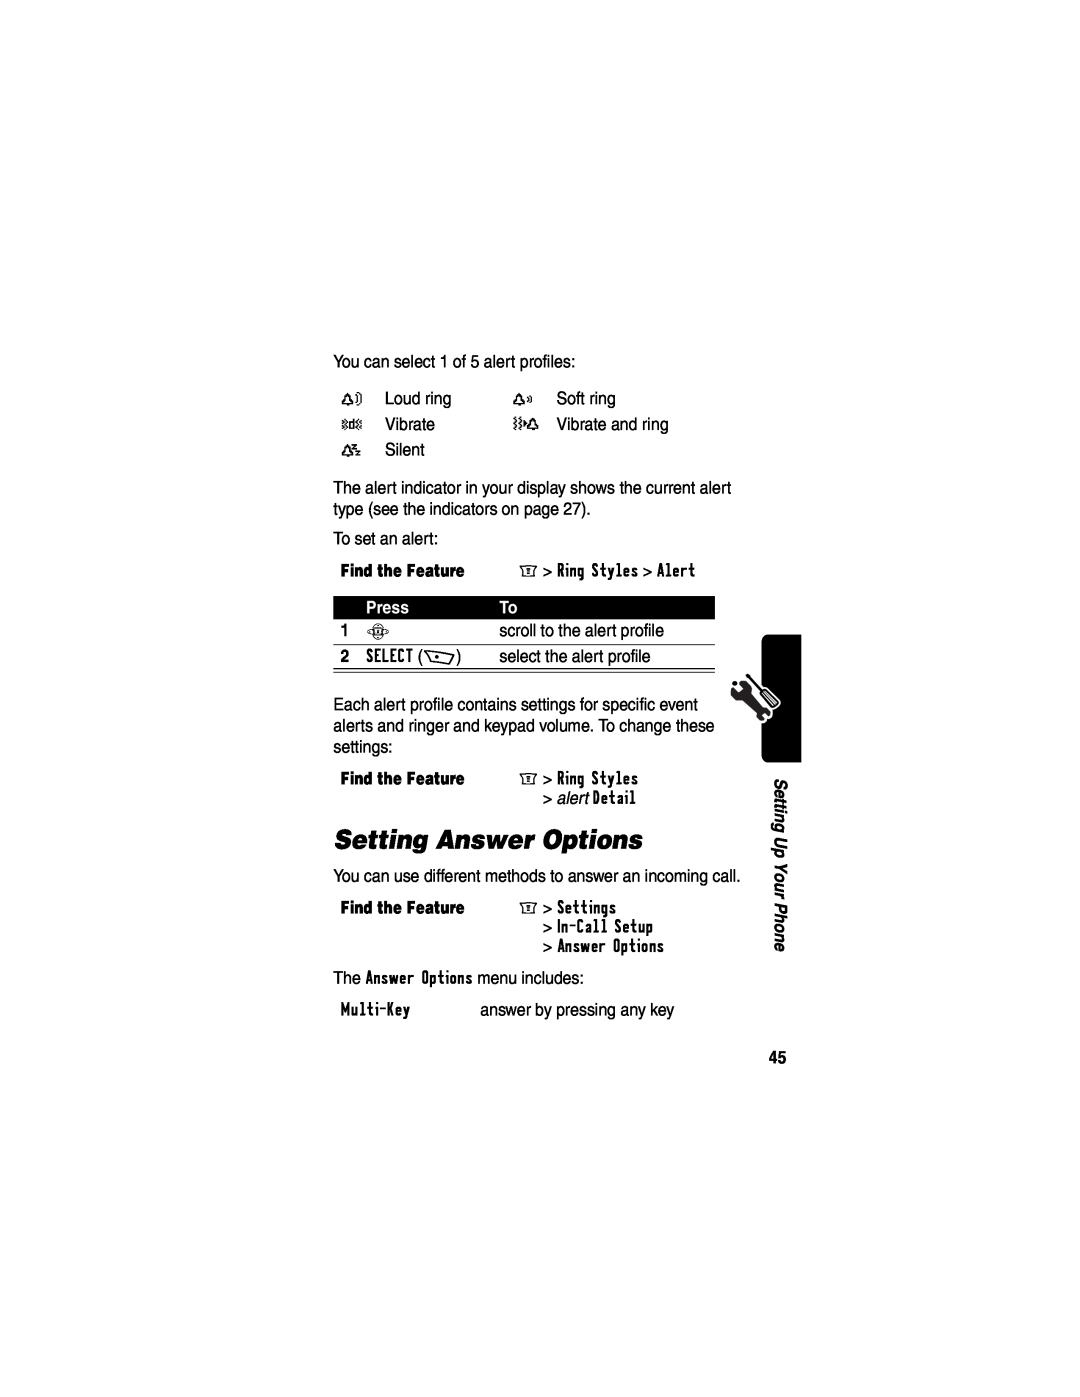 Motorola WIRELESS TELEPHONE manual Setting Answer Options, Find the Feature, Press 